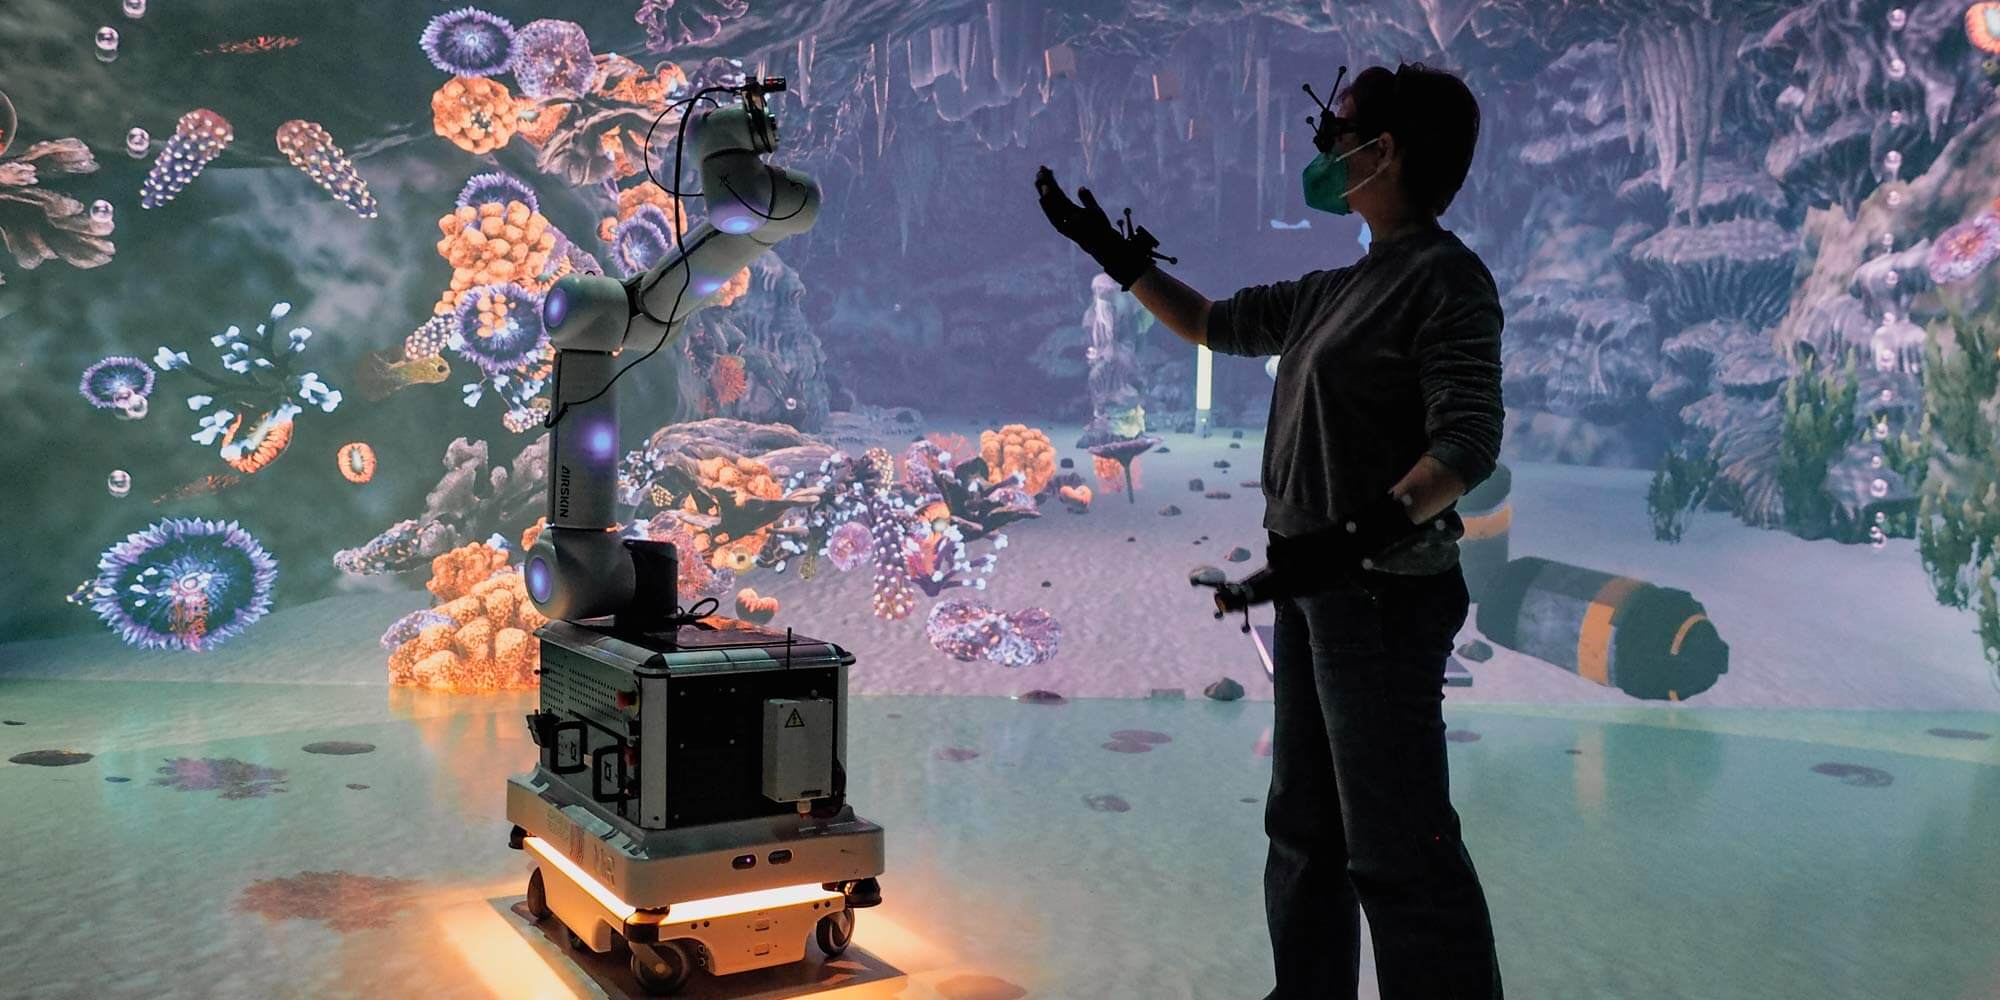 A human interacting with a robot in a virtual environment